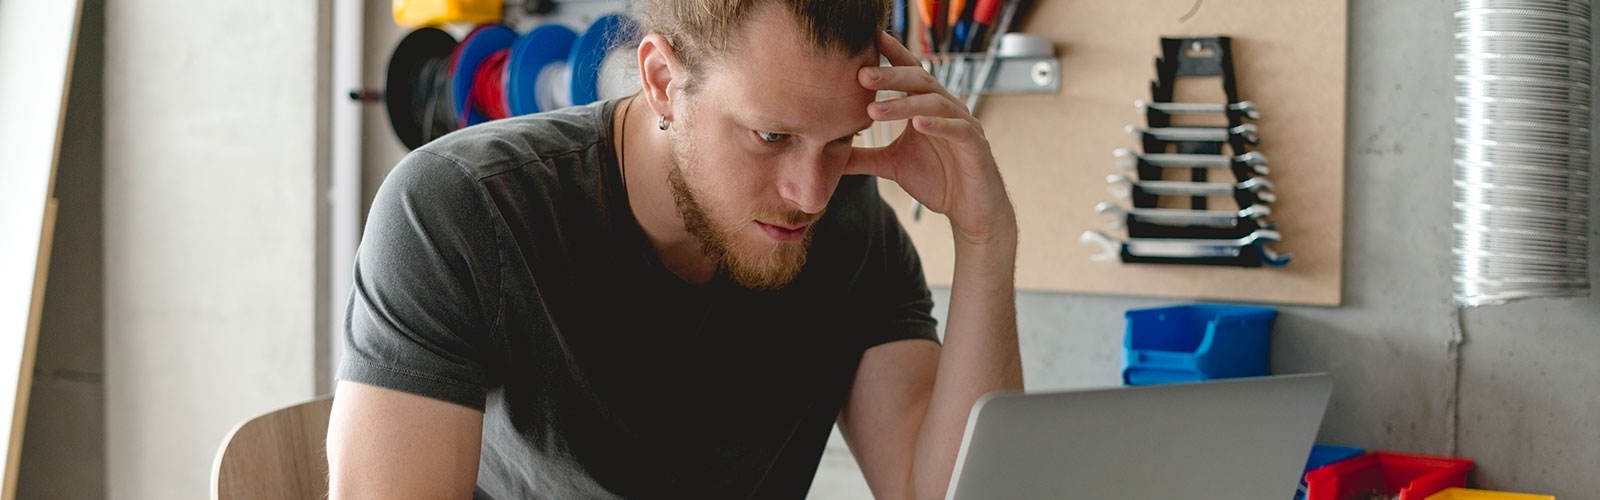 a stressed man looking at a computer in his work room